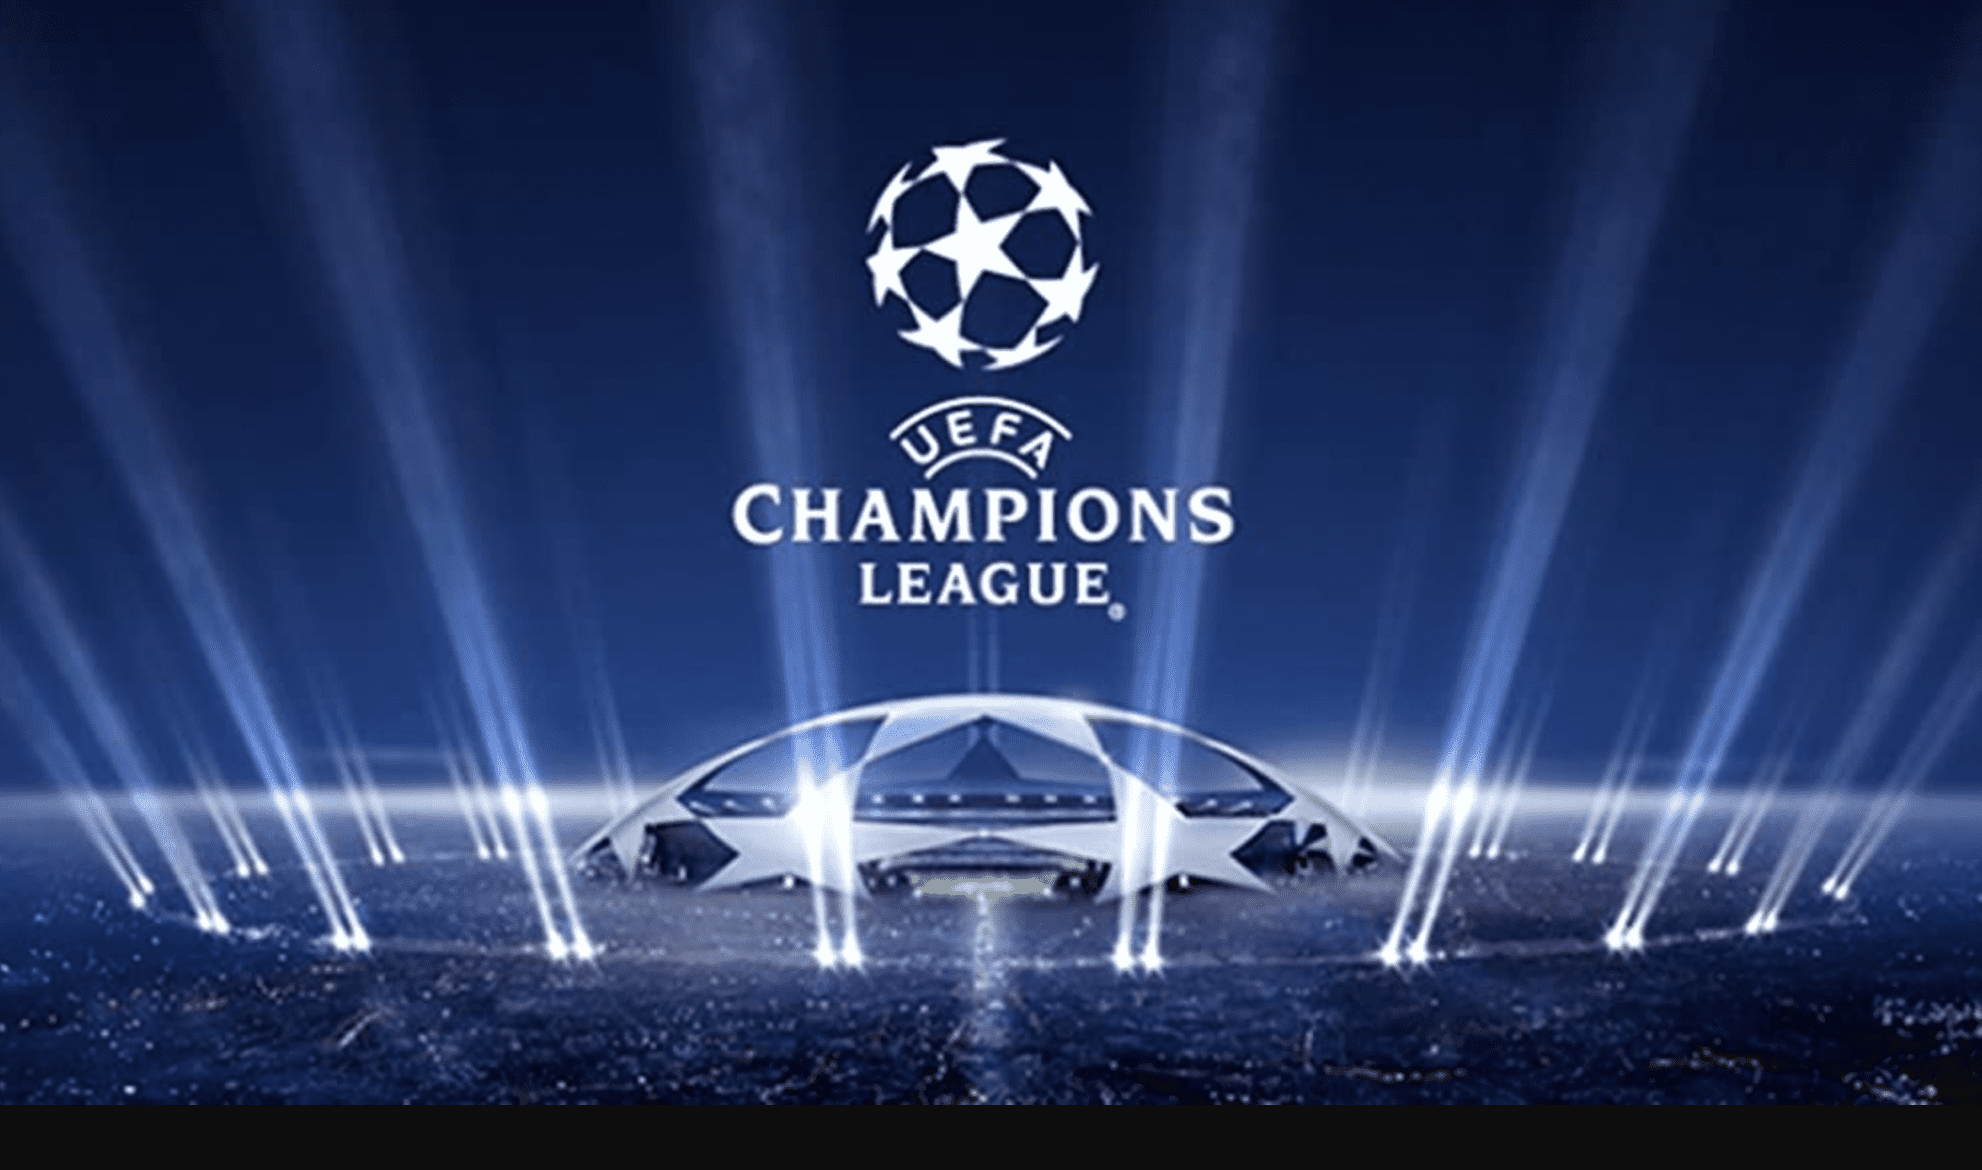 Champion League Football Logo and Graphic